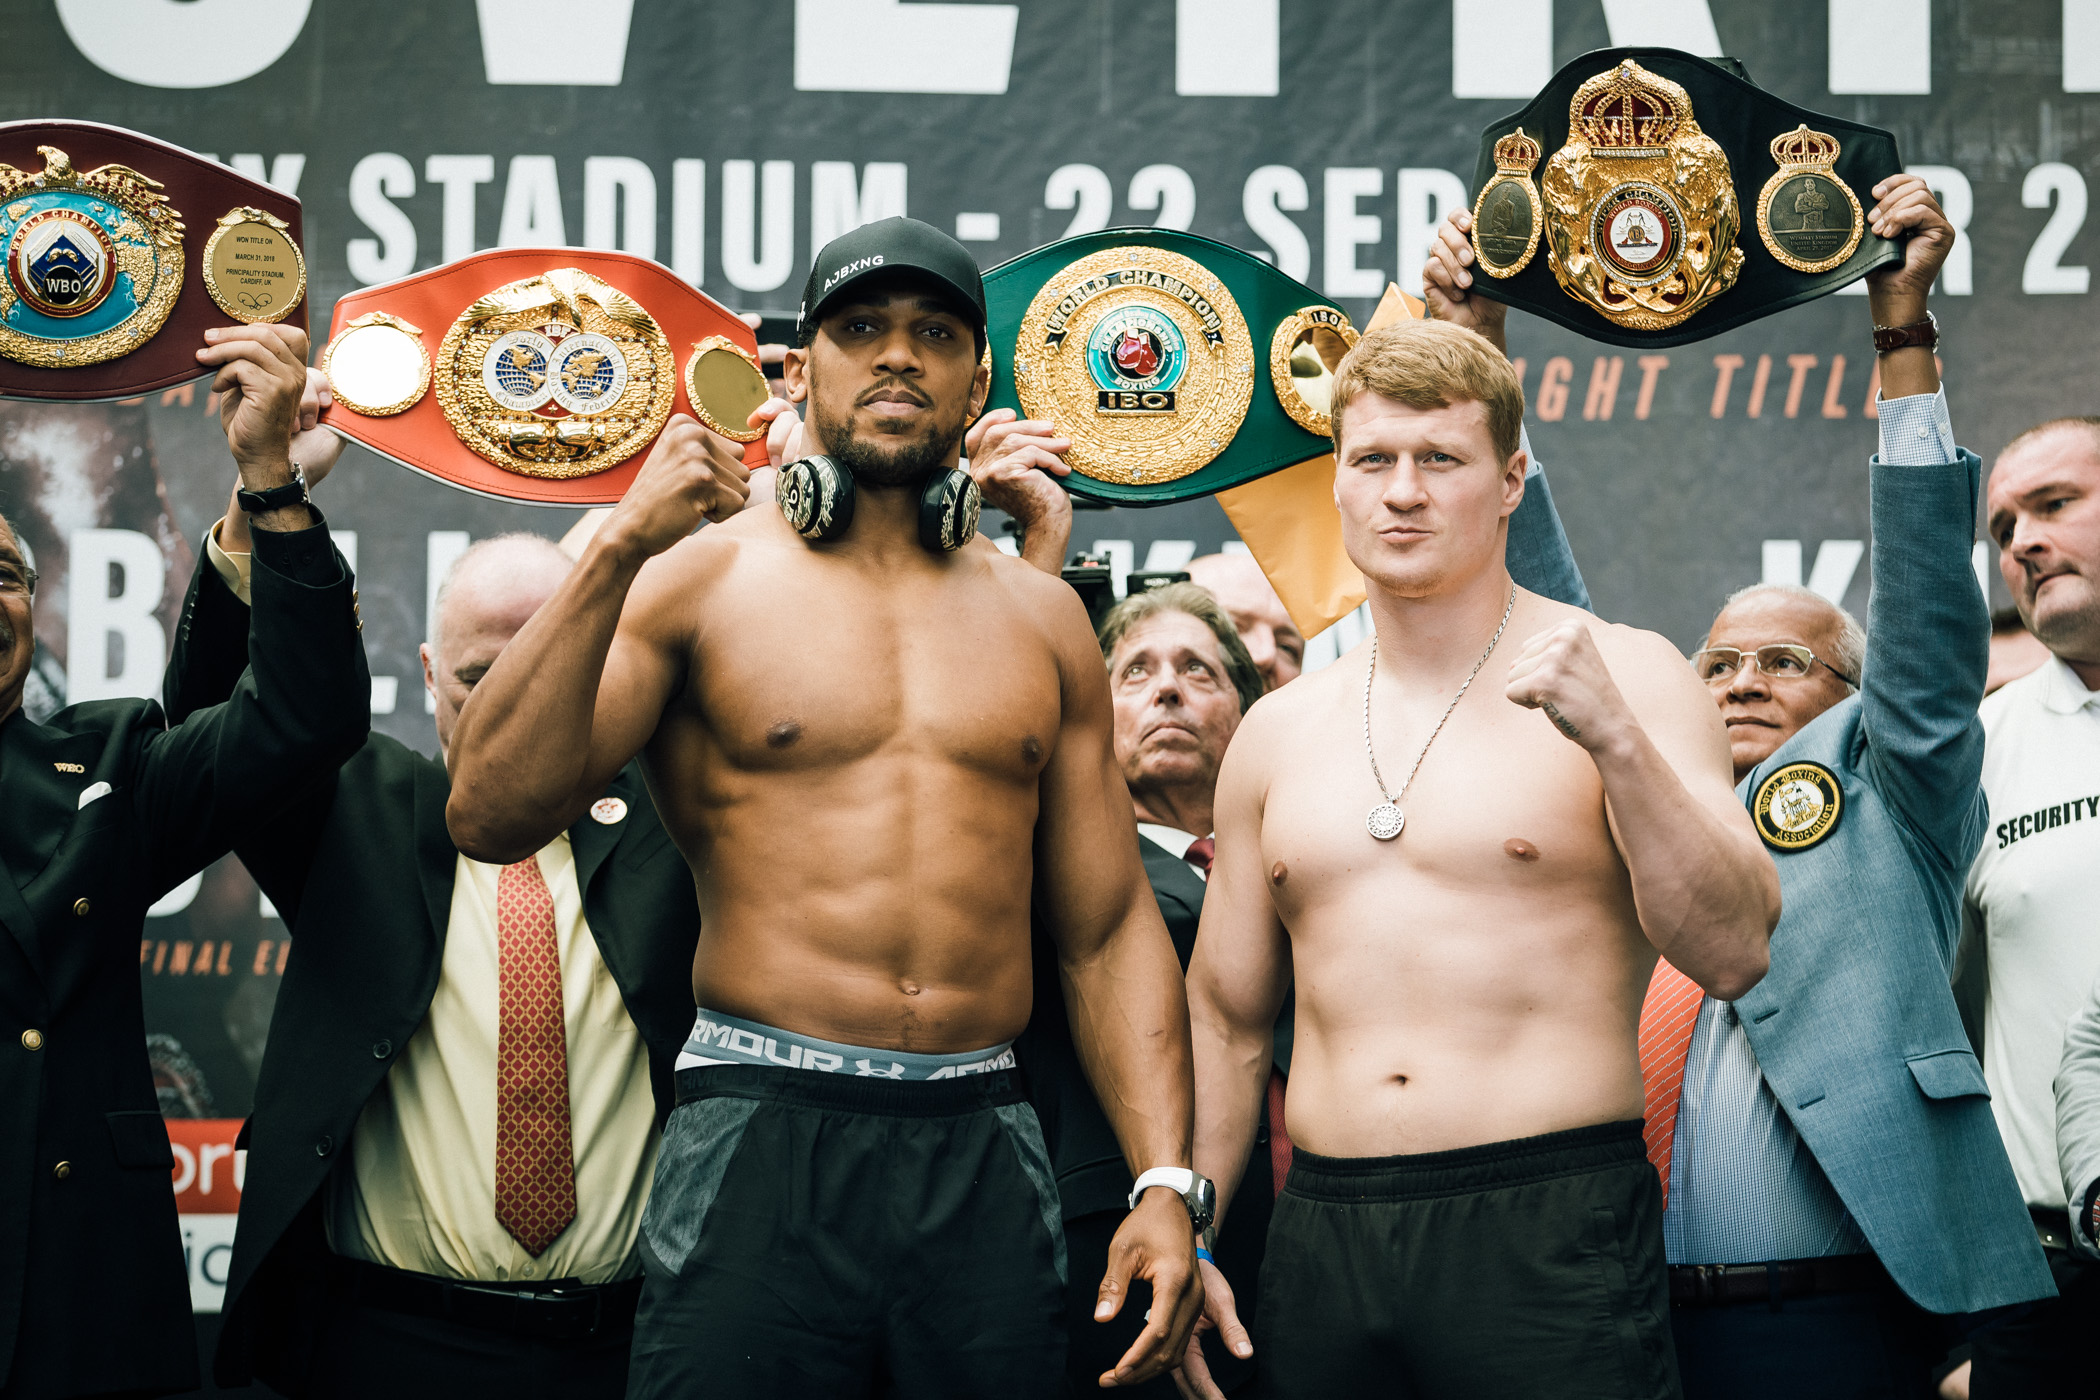 Anthony Joshua towers over Alexander Povetkin at heavyweight title weigh-in - The Ring